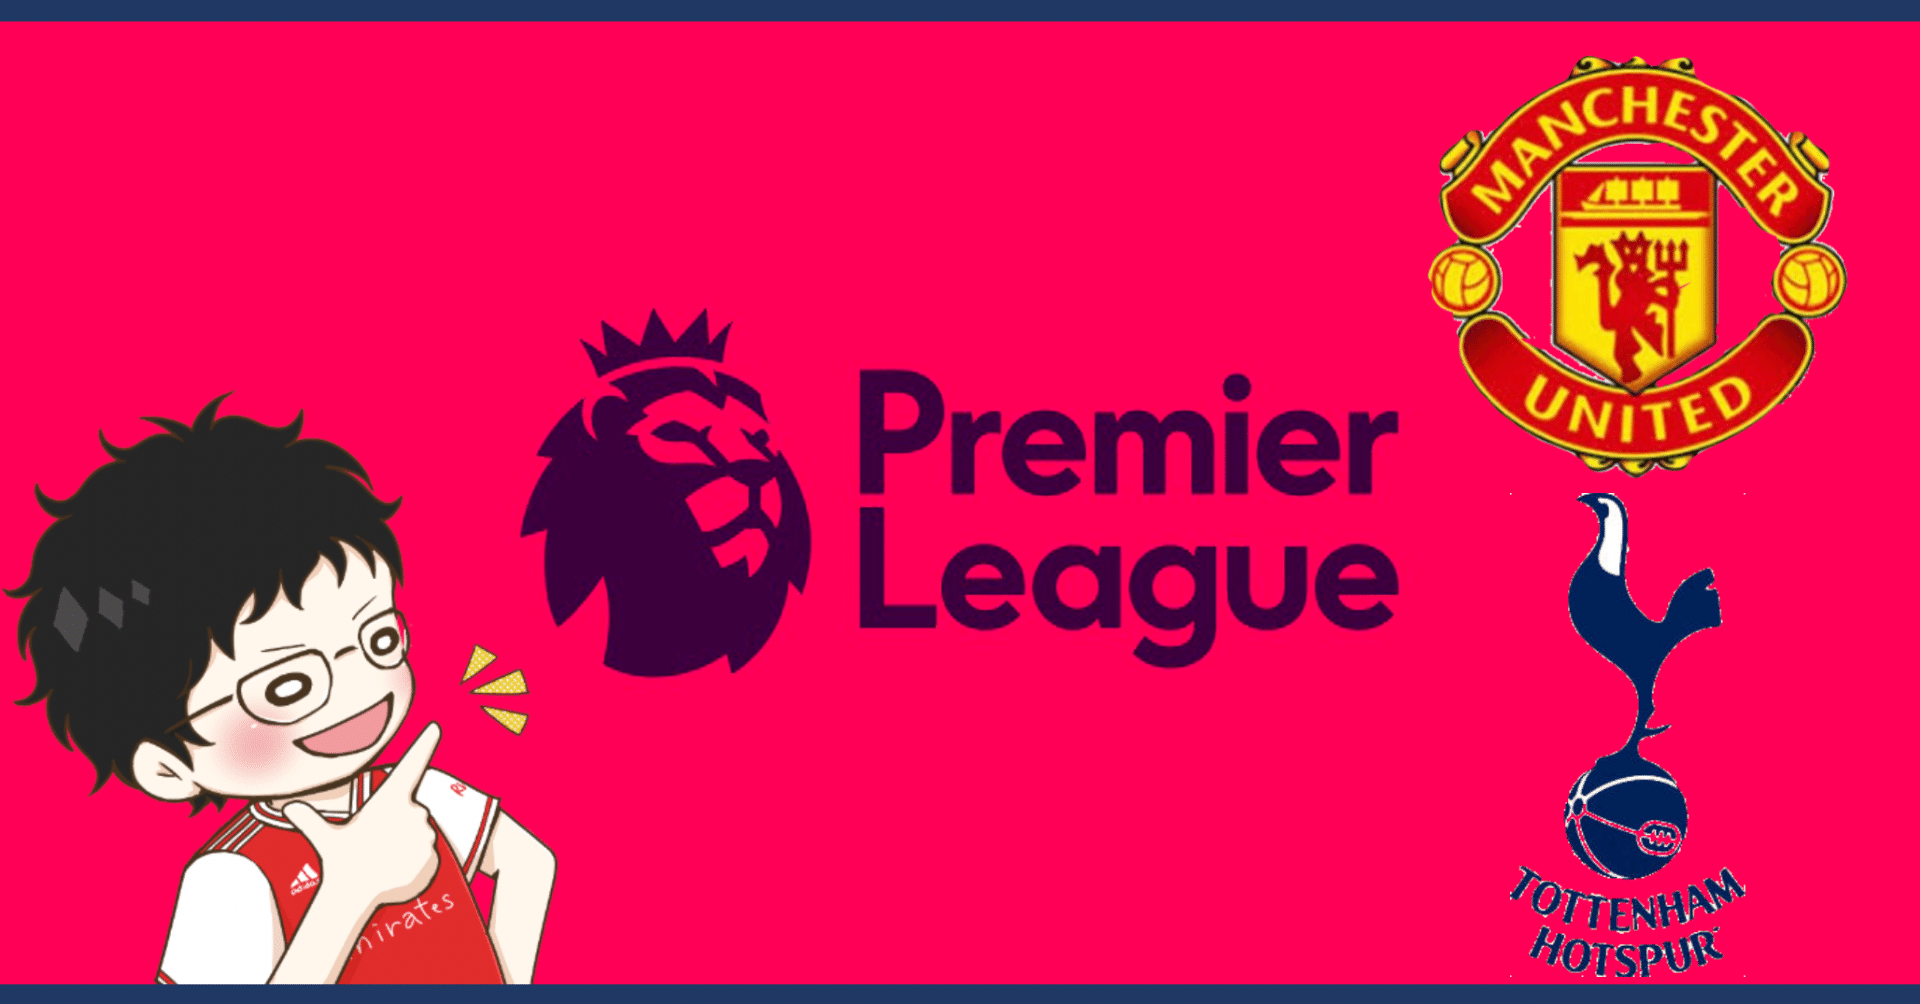 Catch Up Premier League 22 3 12 プレミアリーグ 第29節 マンチェスター ユナイテッド トッテナム ハイライト せこ まとめ記事用 Note